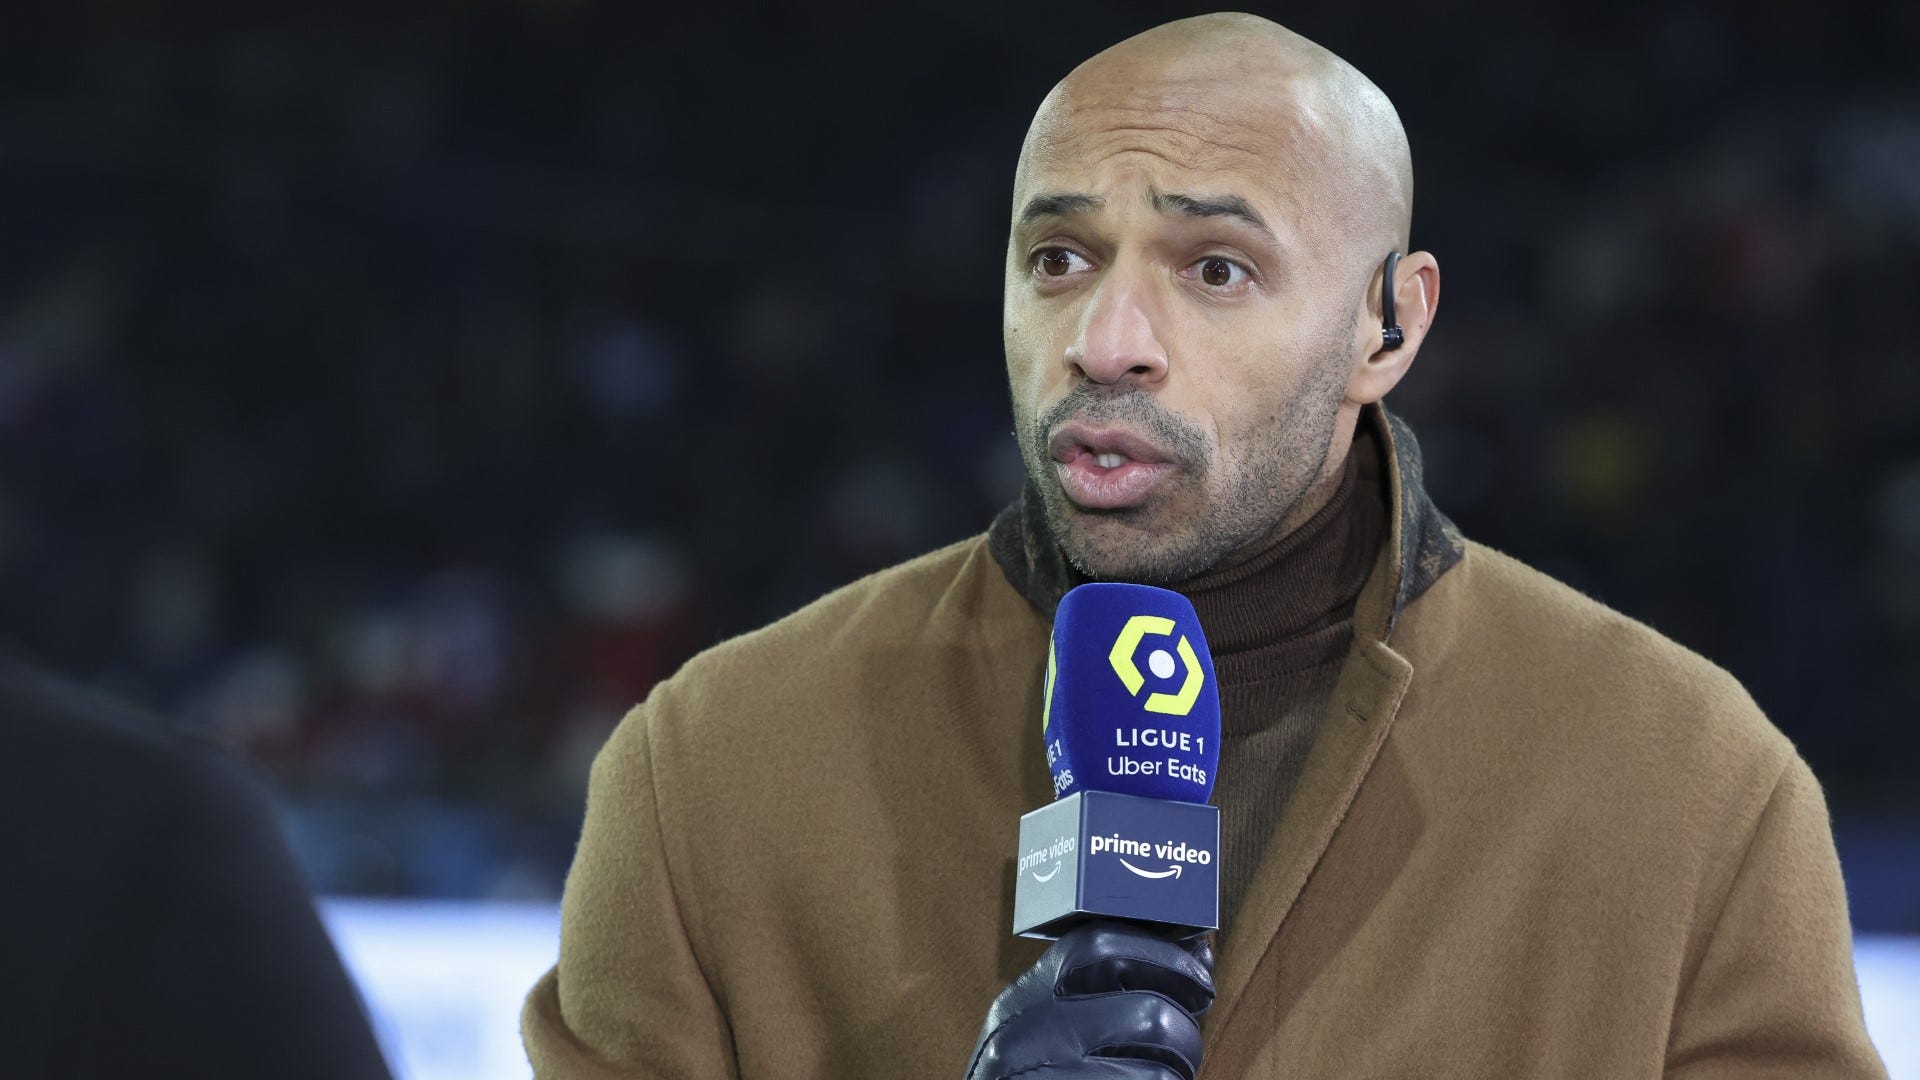 Thierry Henry is named France's new U21 head coach - with the